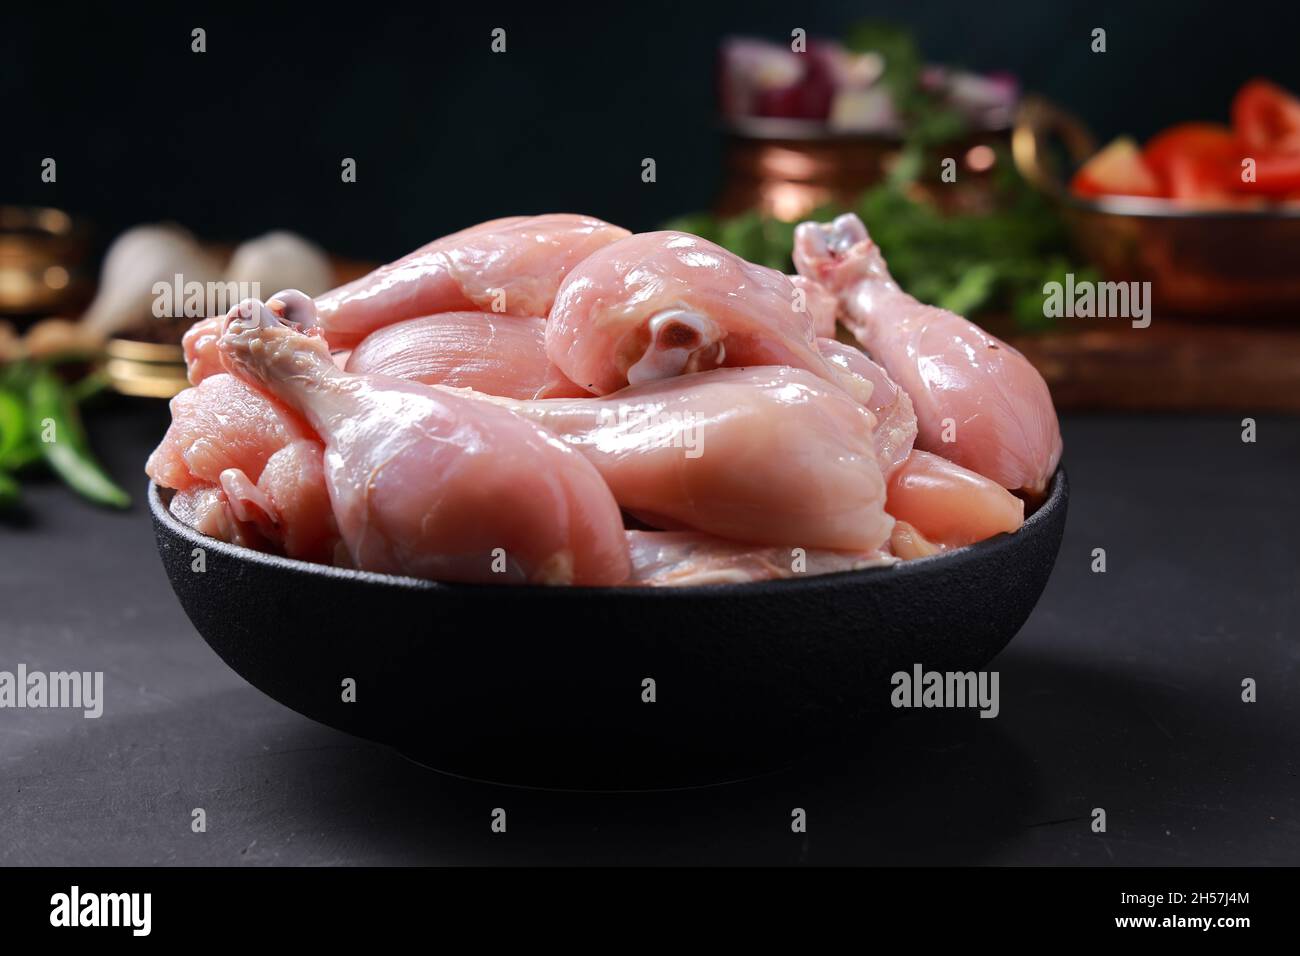 Raw chicken biriyani cut without skin arranged on black container with cooking ingrediants placed nearby. Stock Photo